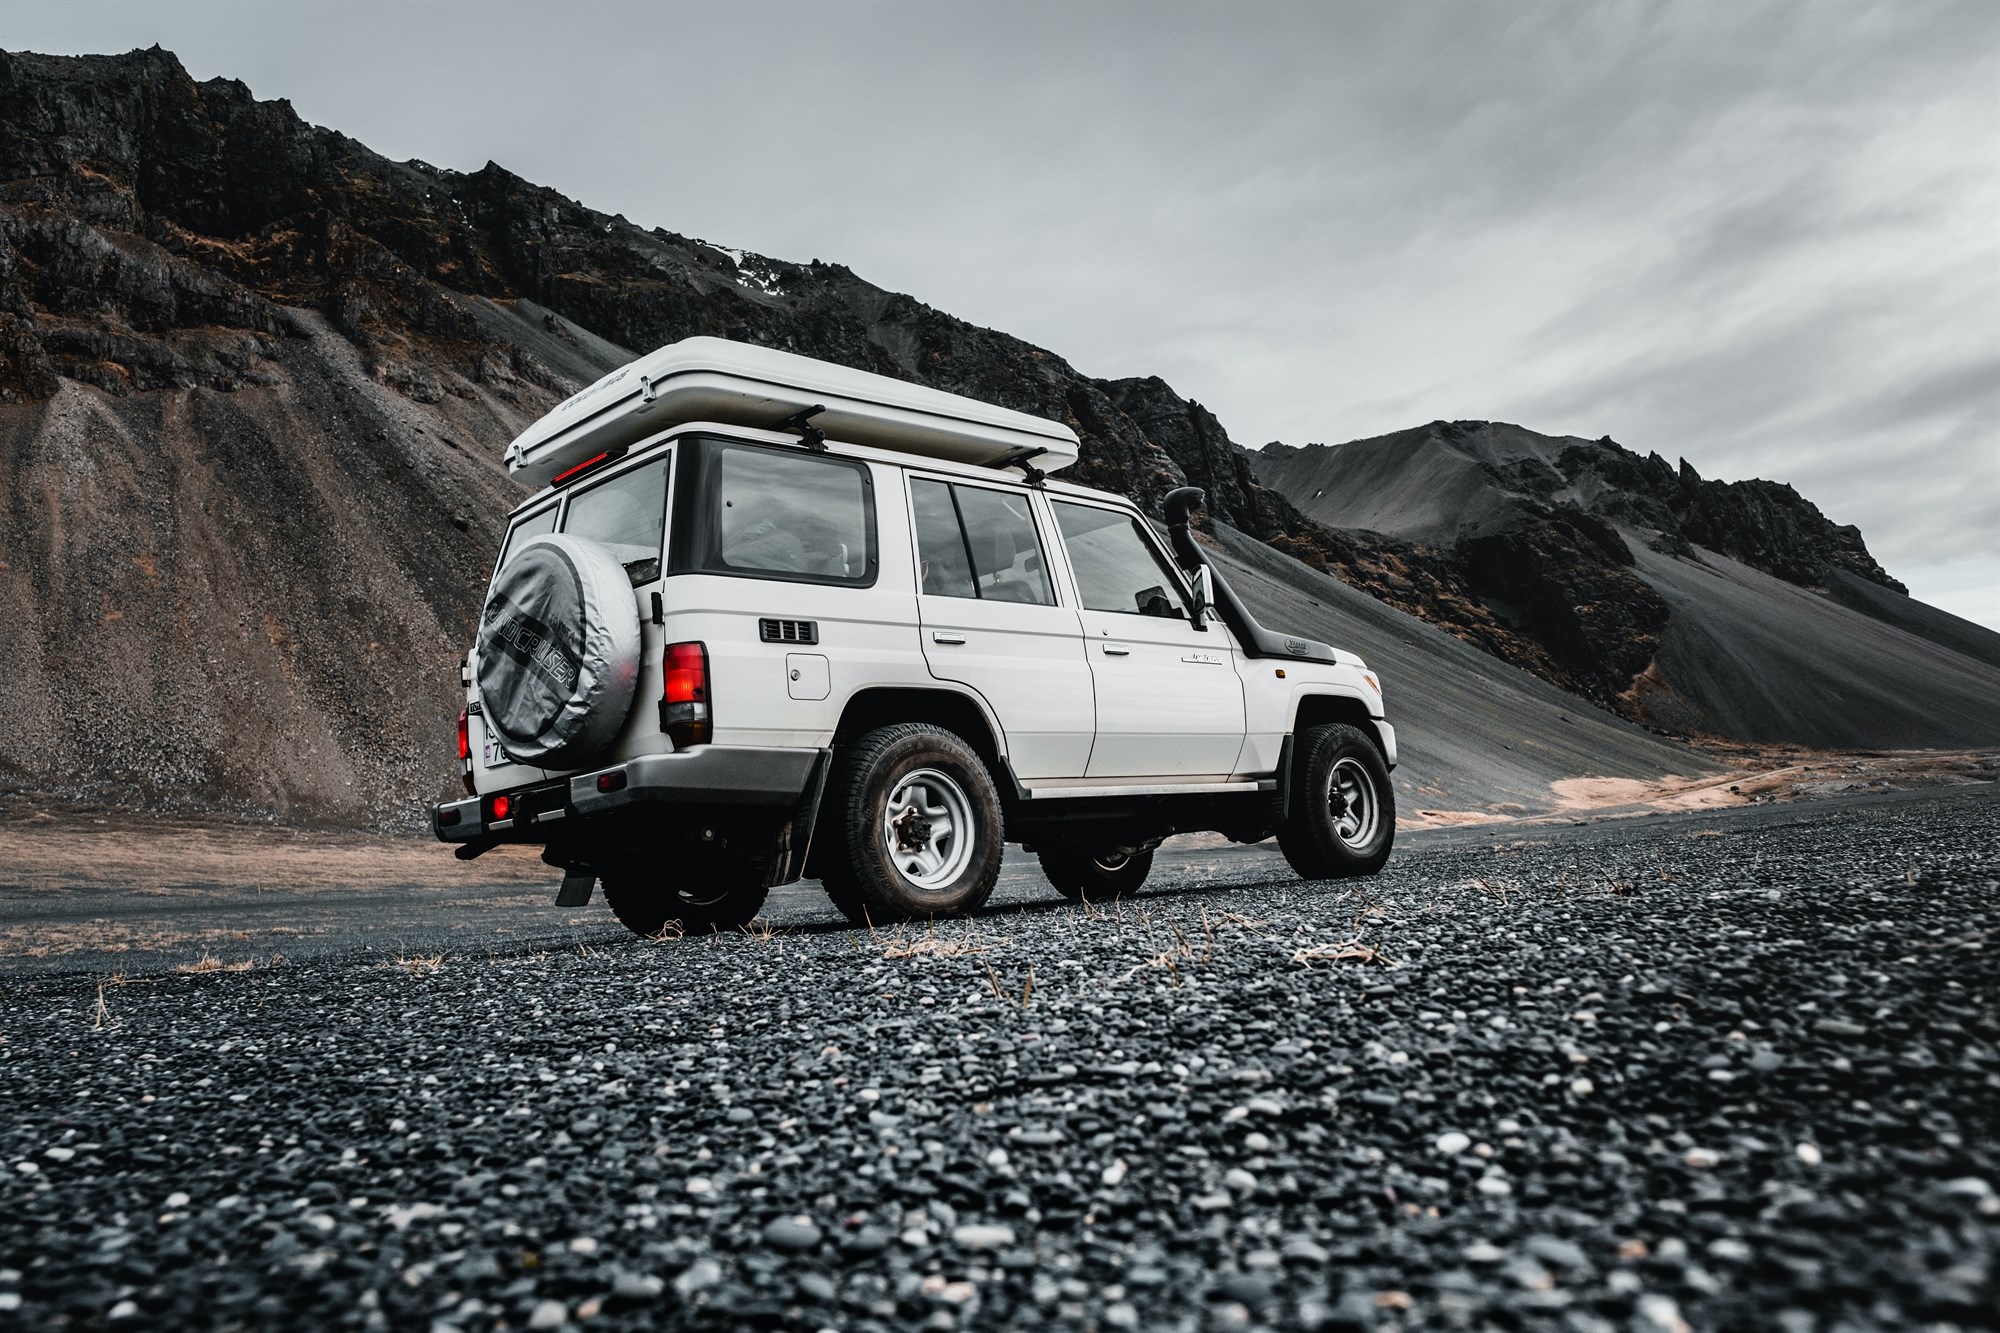 A 4x4 is an excellent choice for your Icelandic trip